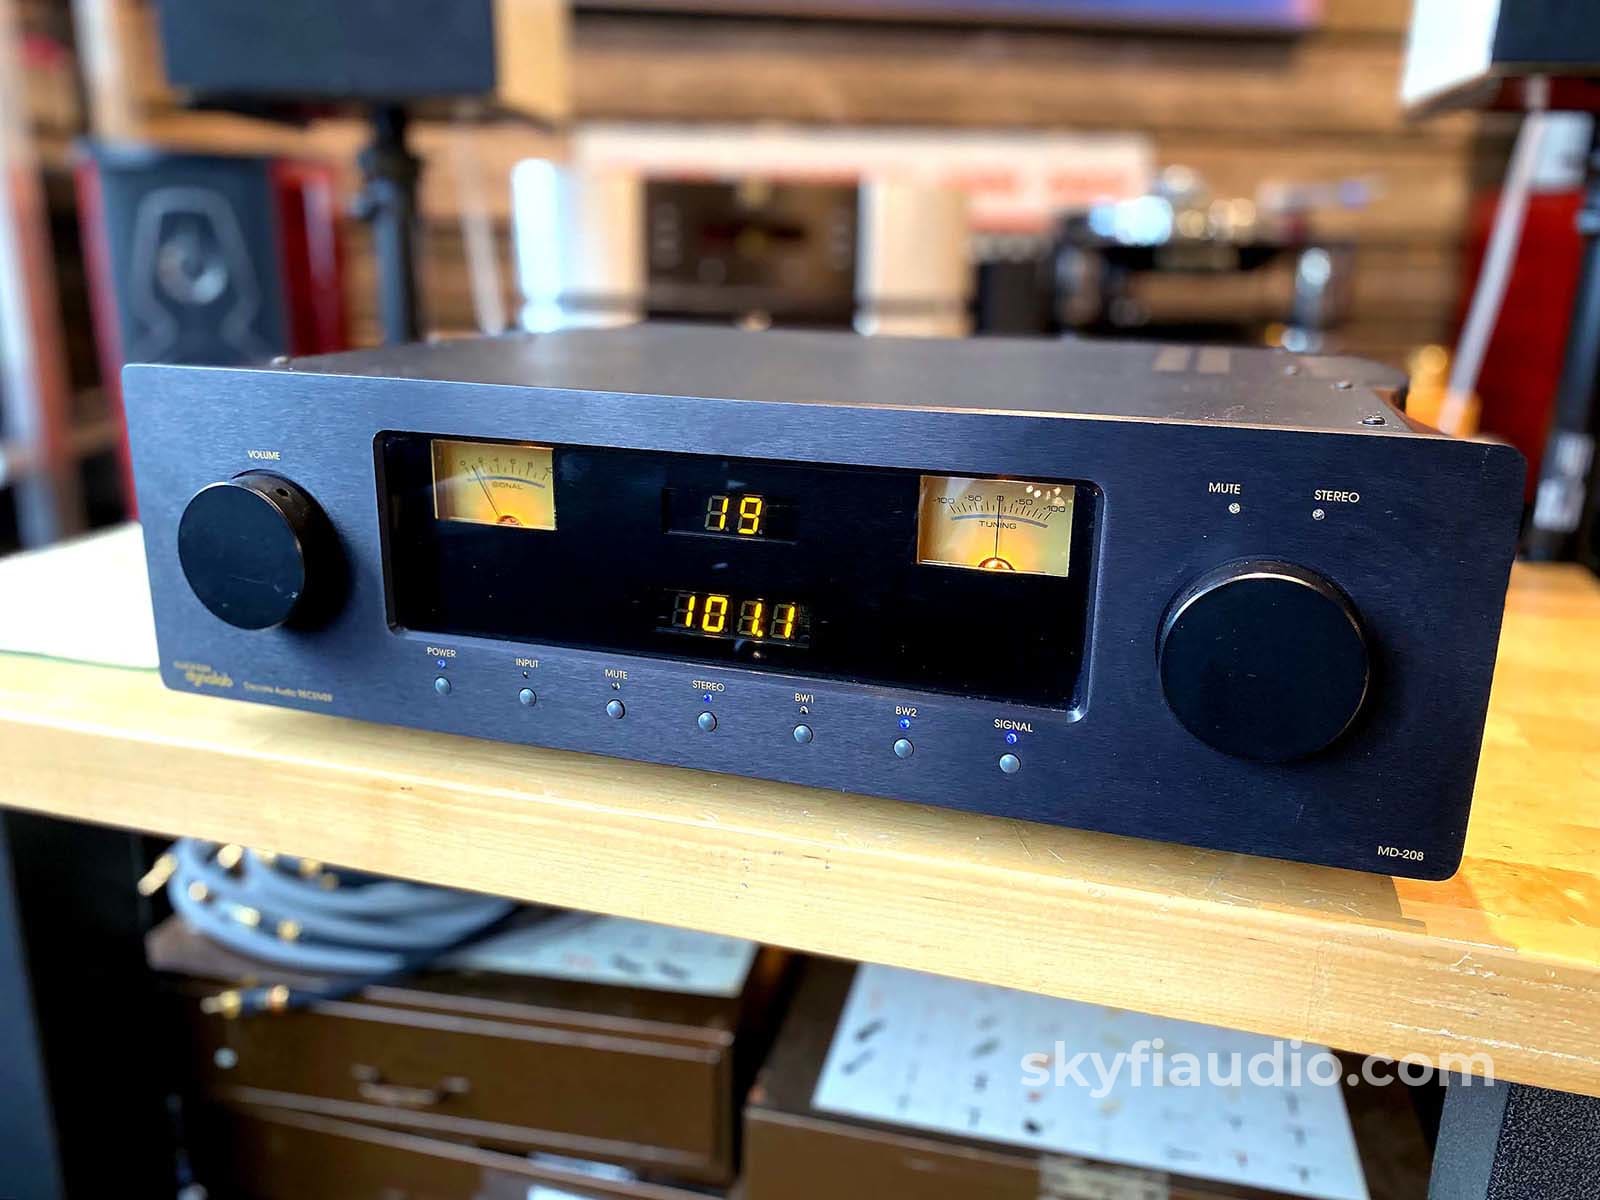 Magnum Dynalab Md 208 Stereo Receiver With Amazing Fm Capabilities - Recent Factory Service